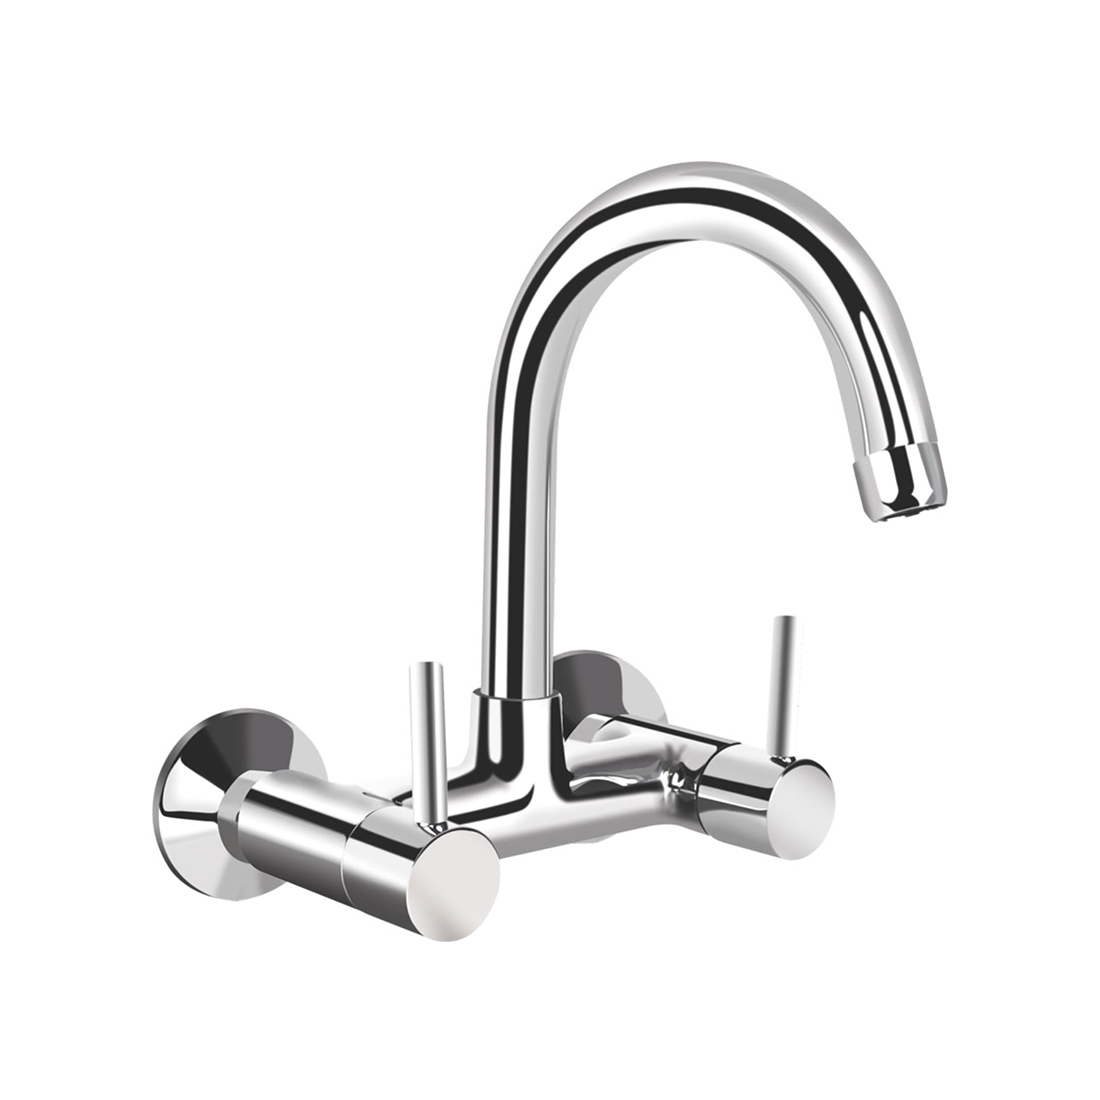 Kerovit Nucleus KB111024 Sink Mixer With Swivel Spout and Flange